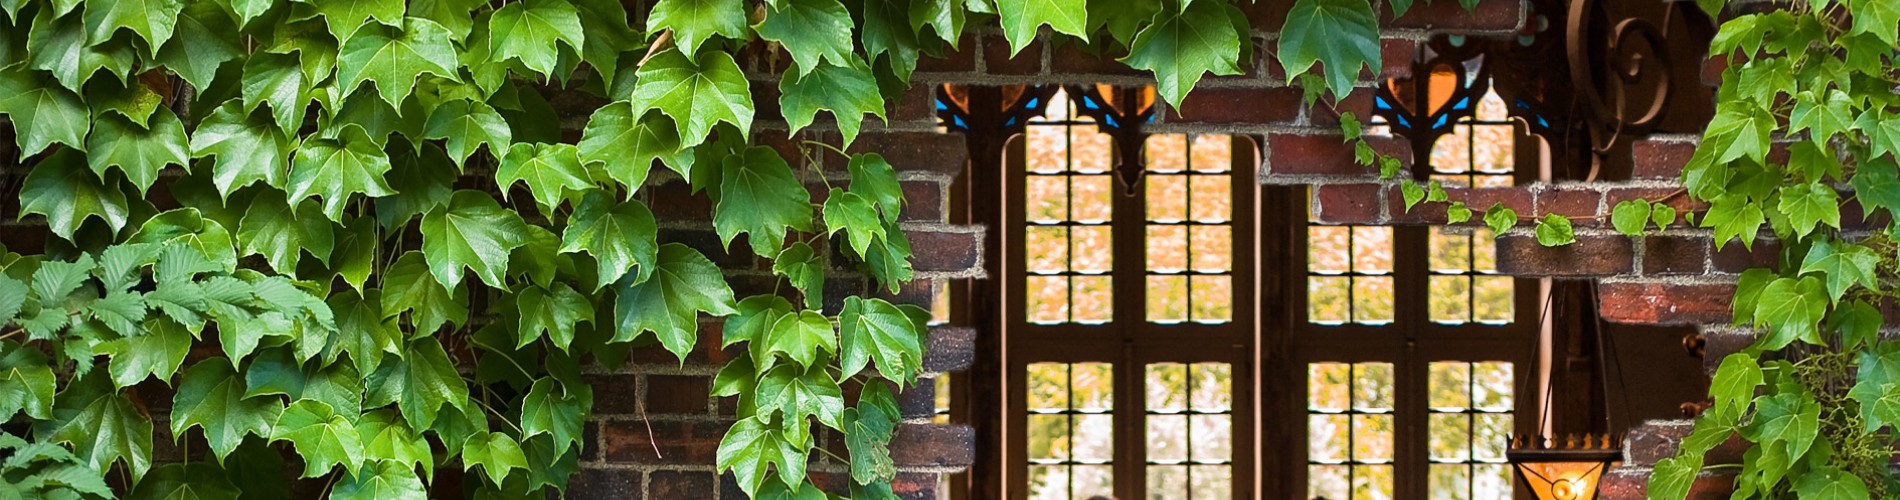 Looking through window of campus library covered in ivy